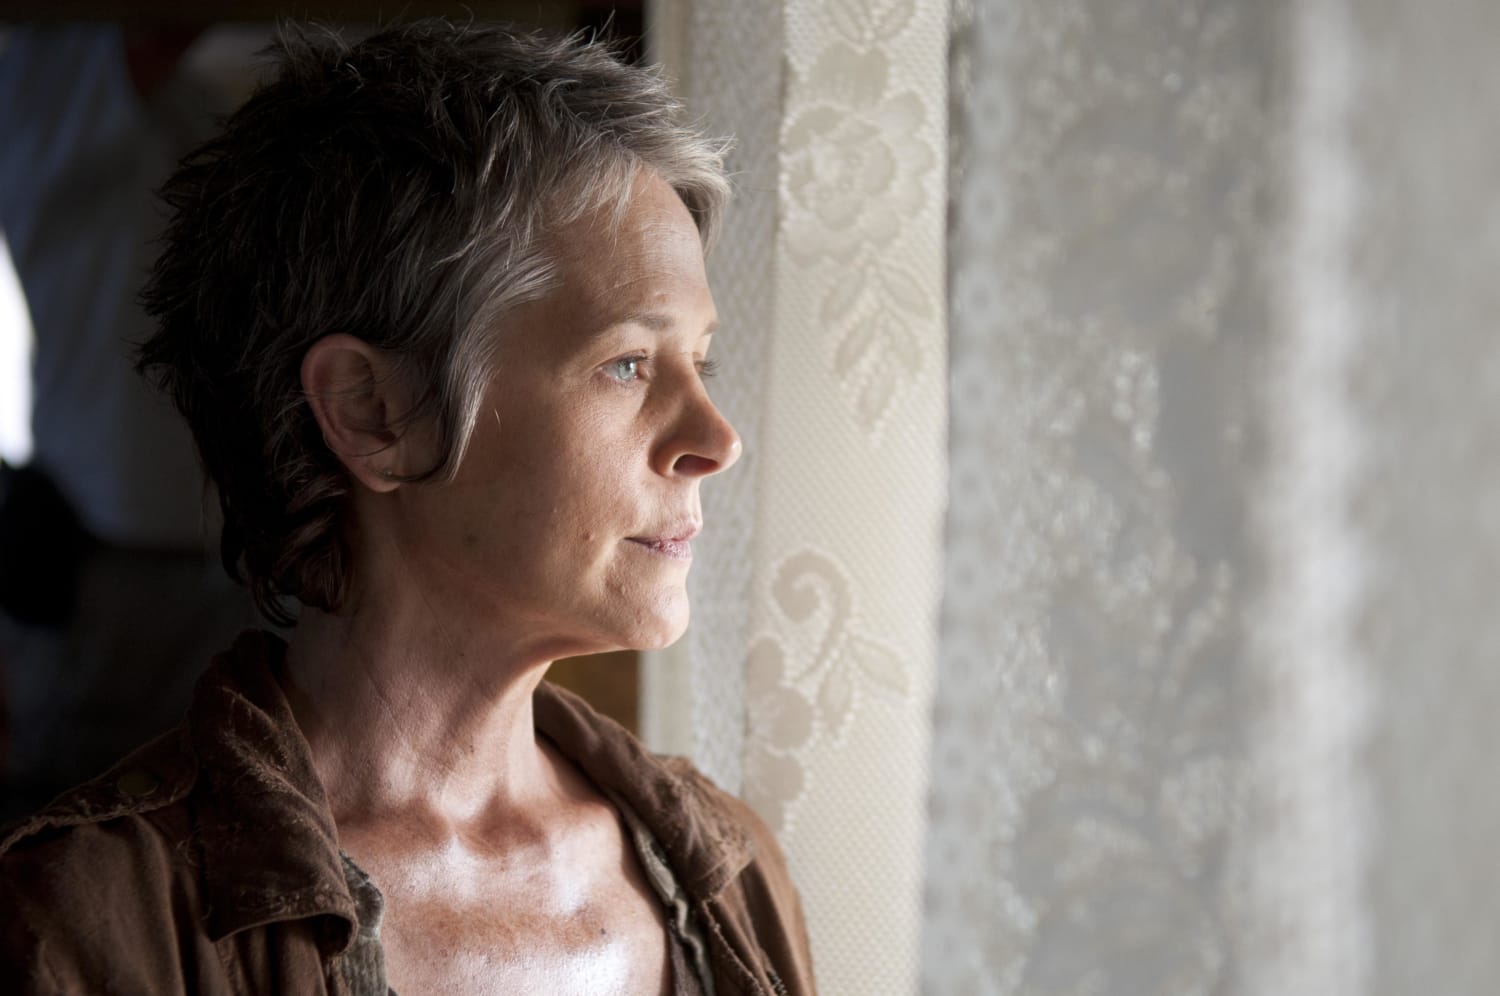 Carol Does the Unthinkable on 'The Walking Dead'